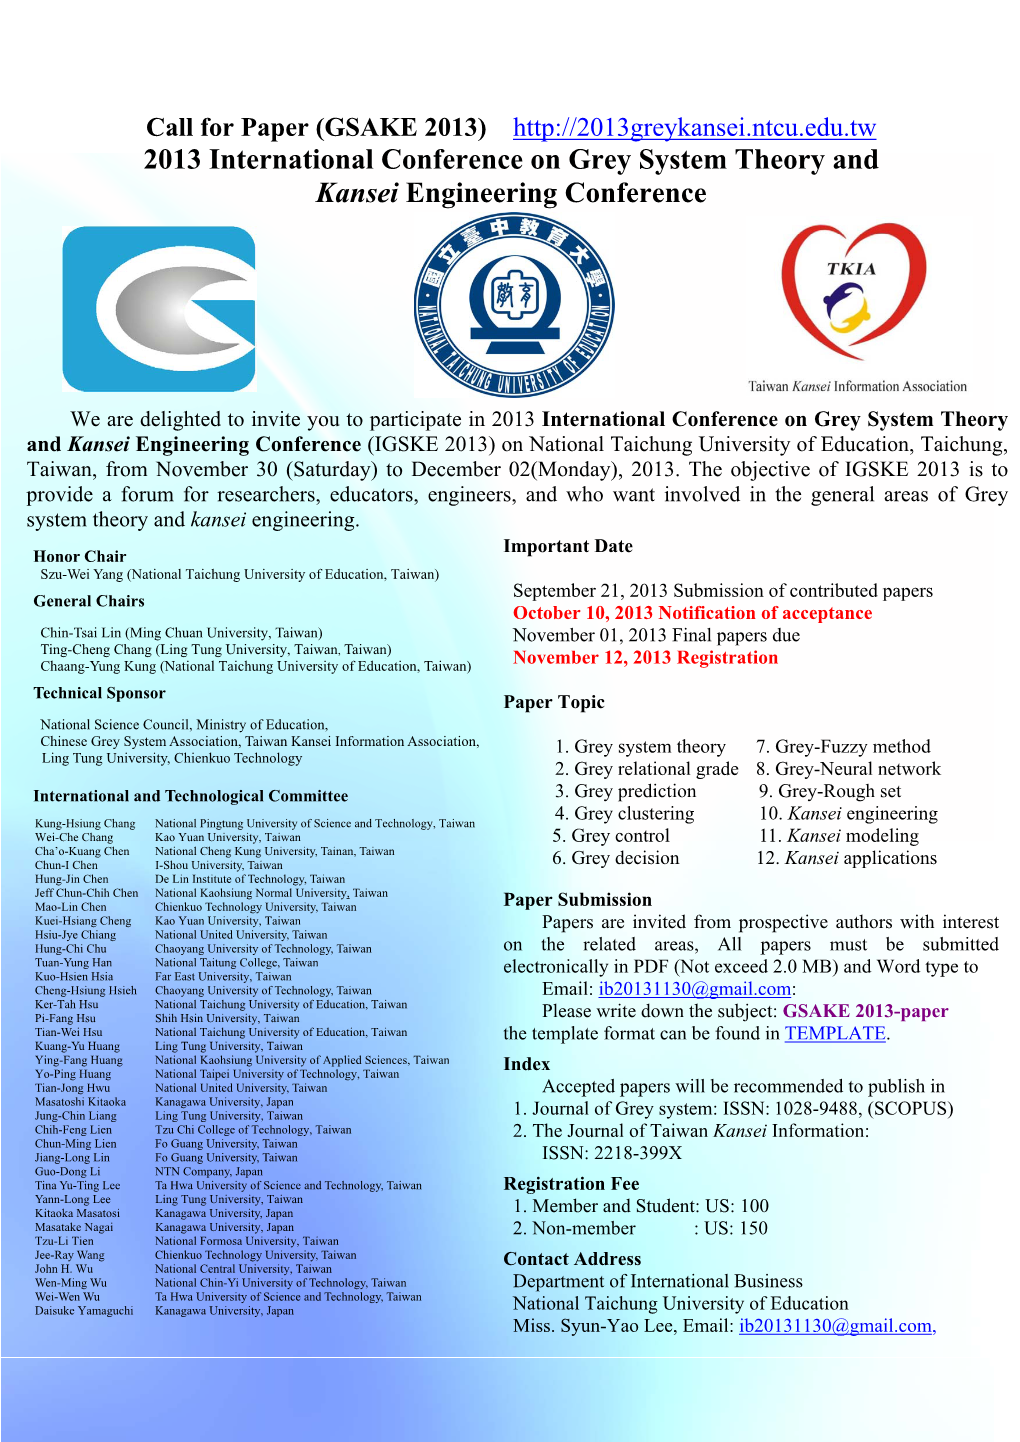 2013 International Conference on Grey System Theory and Kansei Engineering Conference